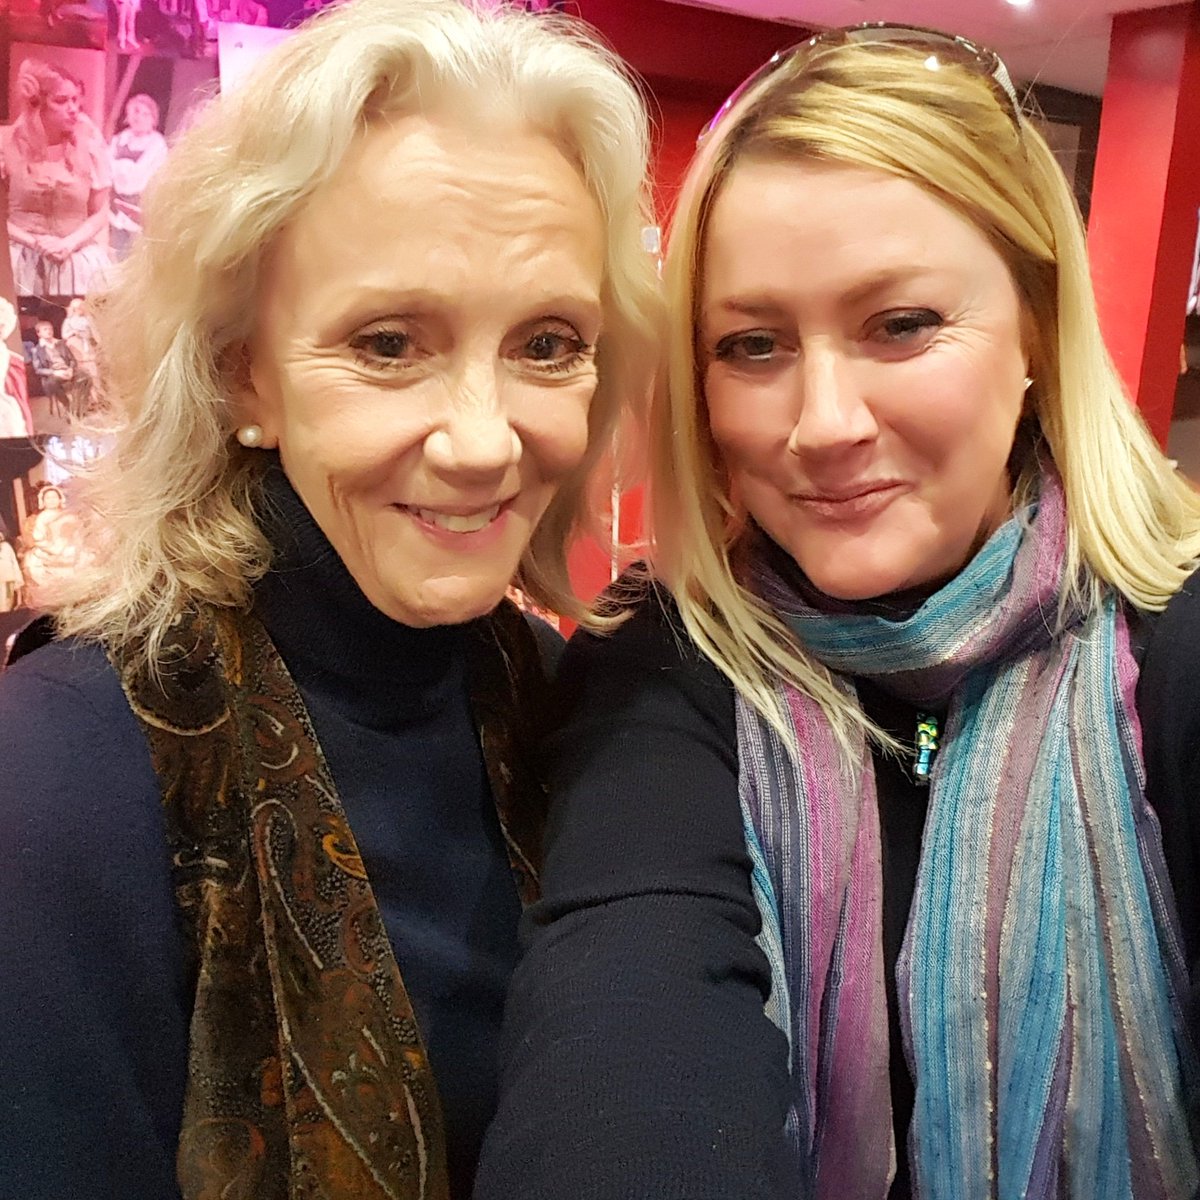 Today I met the wonderful Hayley Mills... my childhood HERO! @QFTBelfast I am so happy!!! Thank you for being so lovely #Hayleymills #whistledownthewind